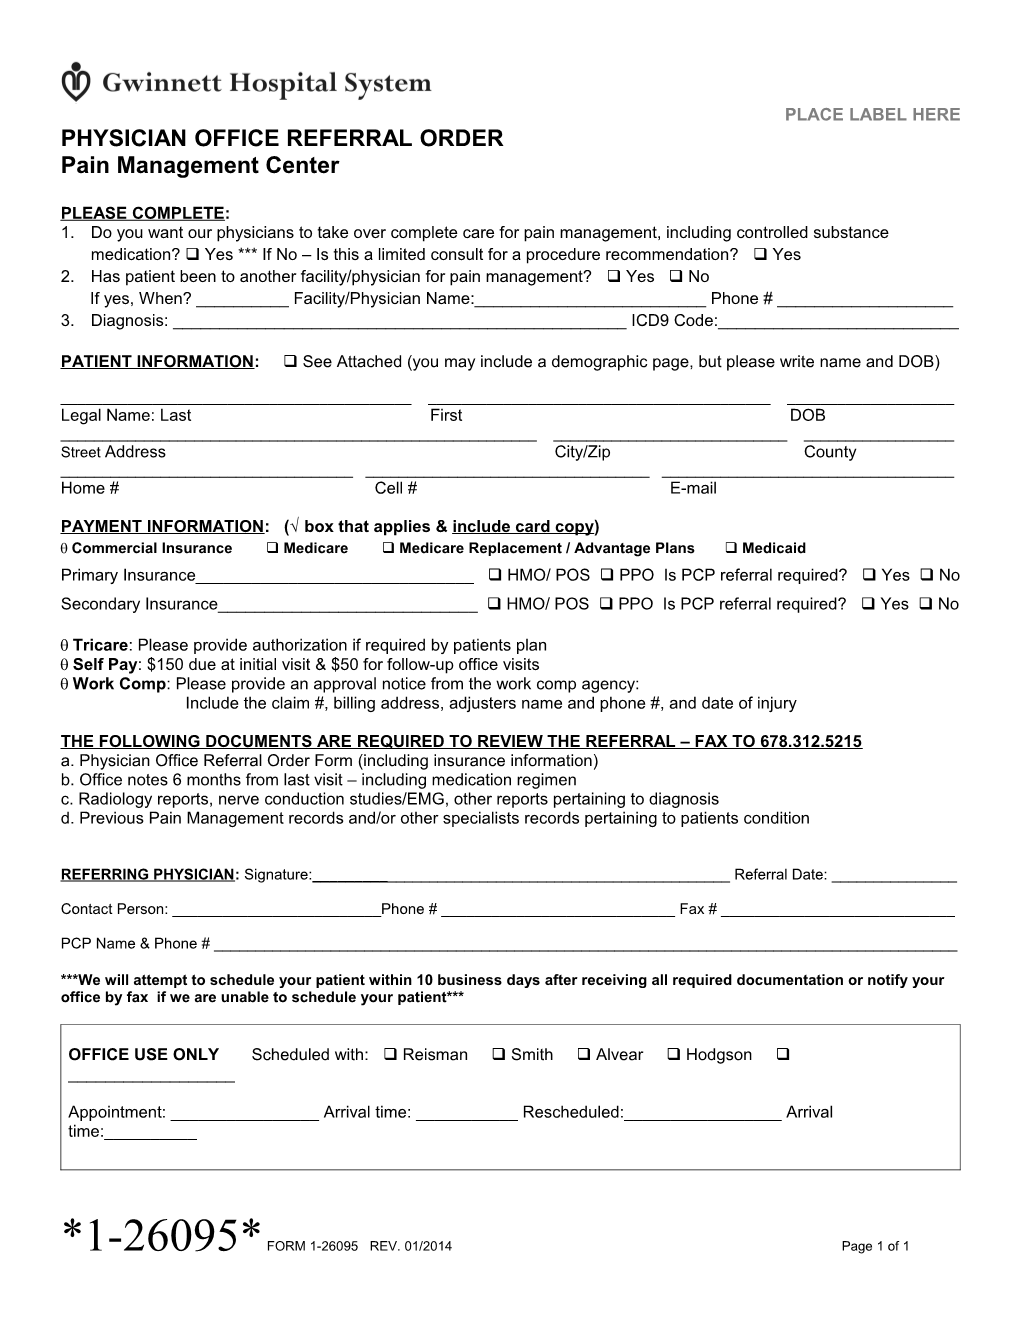 Physician Office Referral Order Pain Management Center